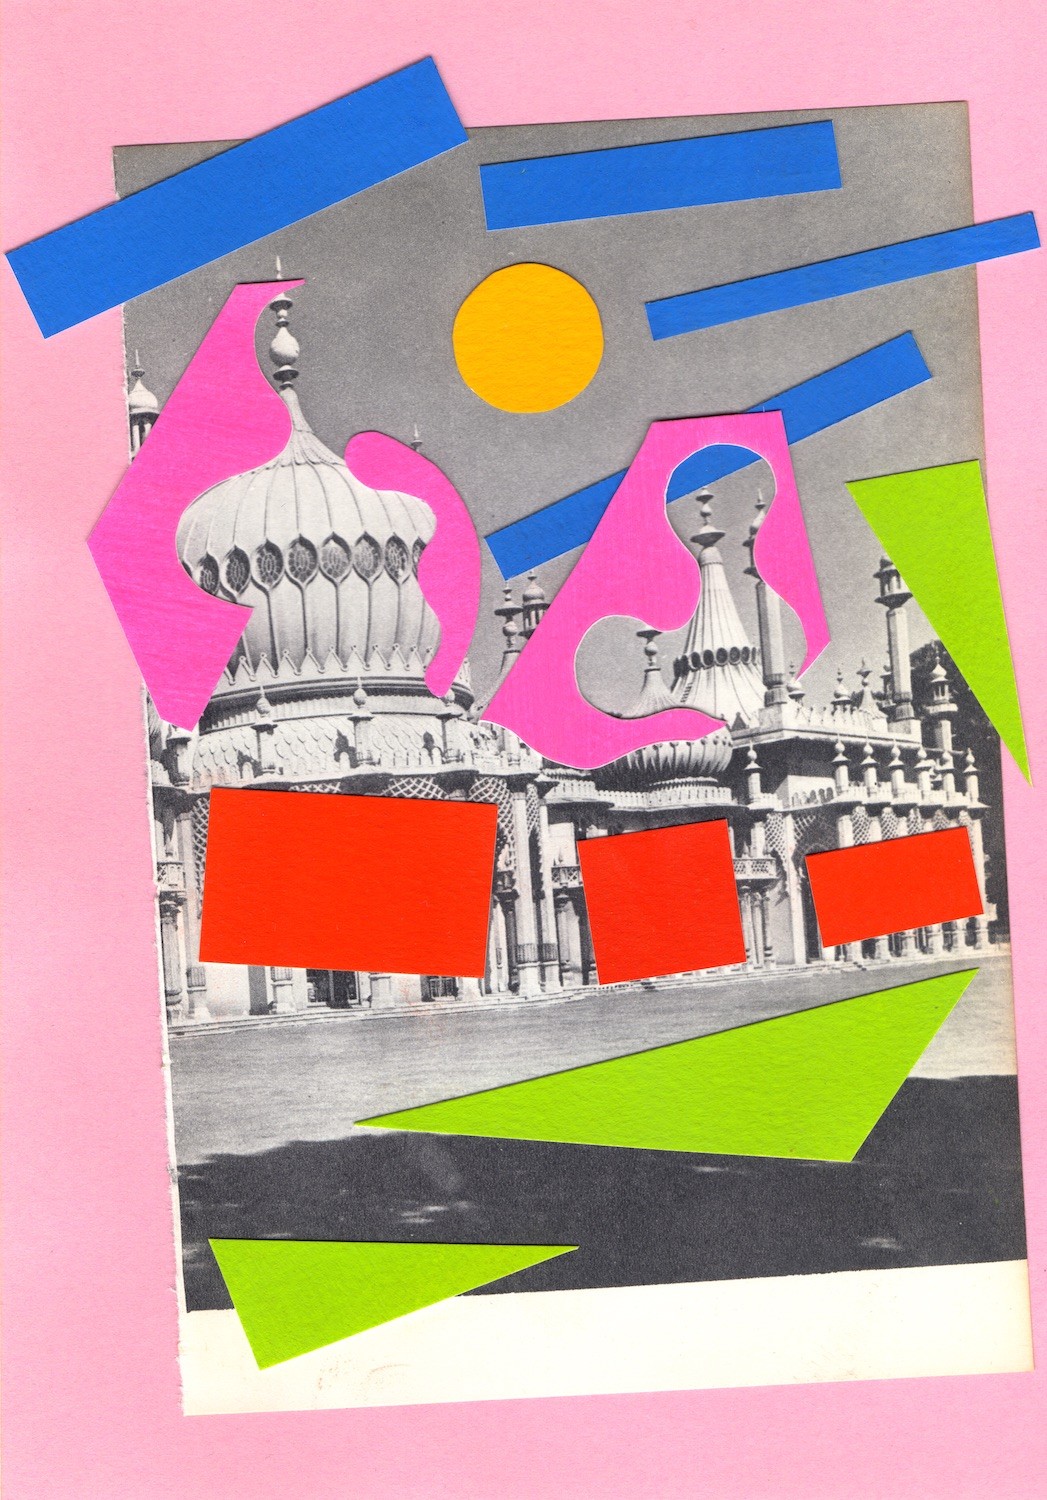 Brighton: Places, Spaces & Faces - Catalogue of Works